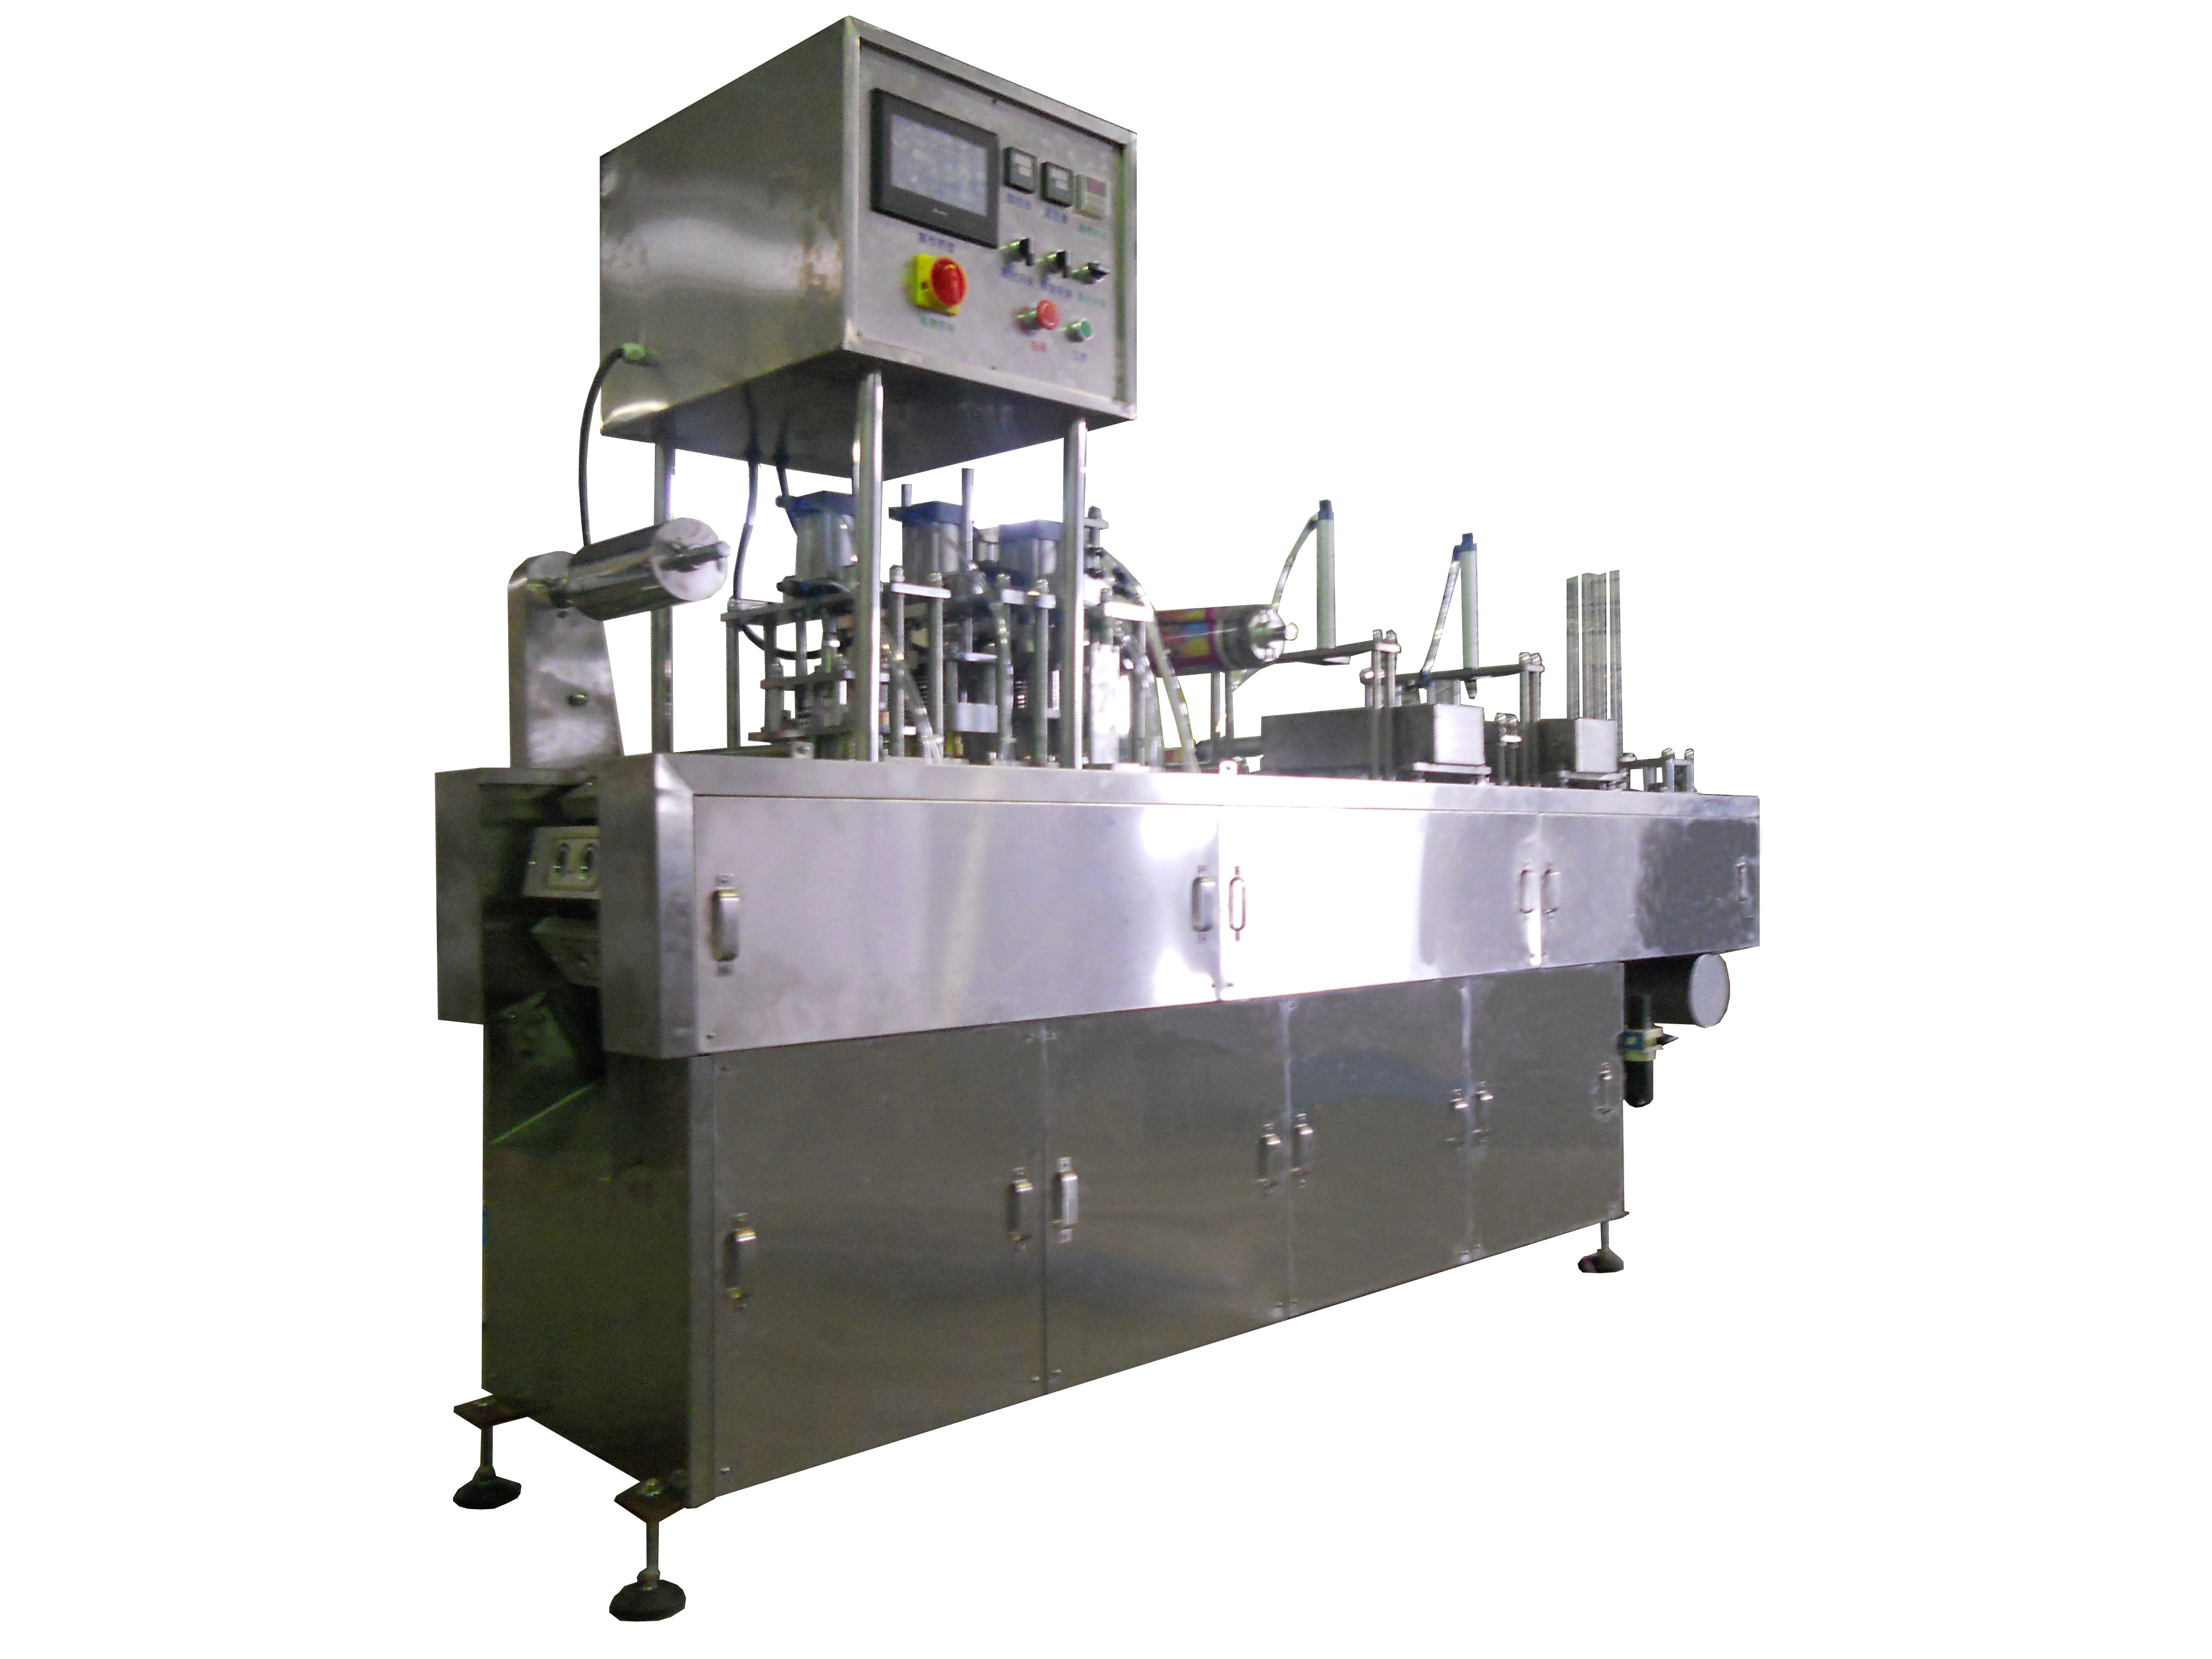 Automatic powder packaging machine: Intelligent packaging to improve efficiency